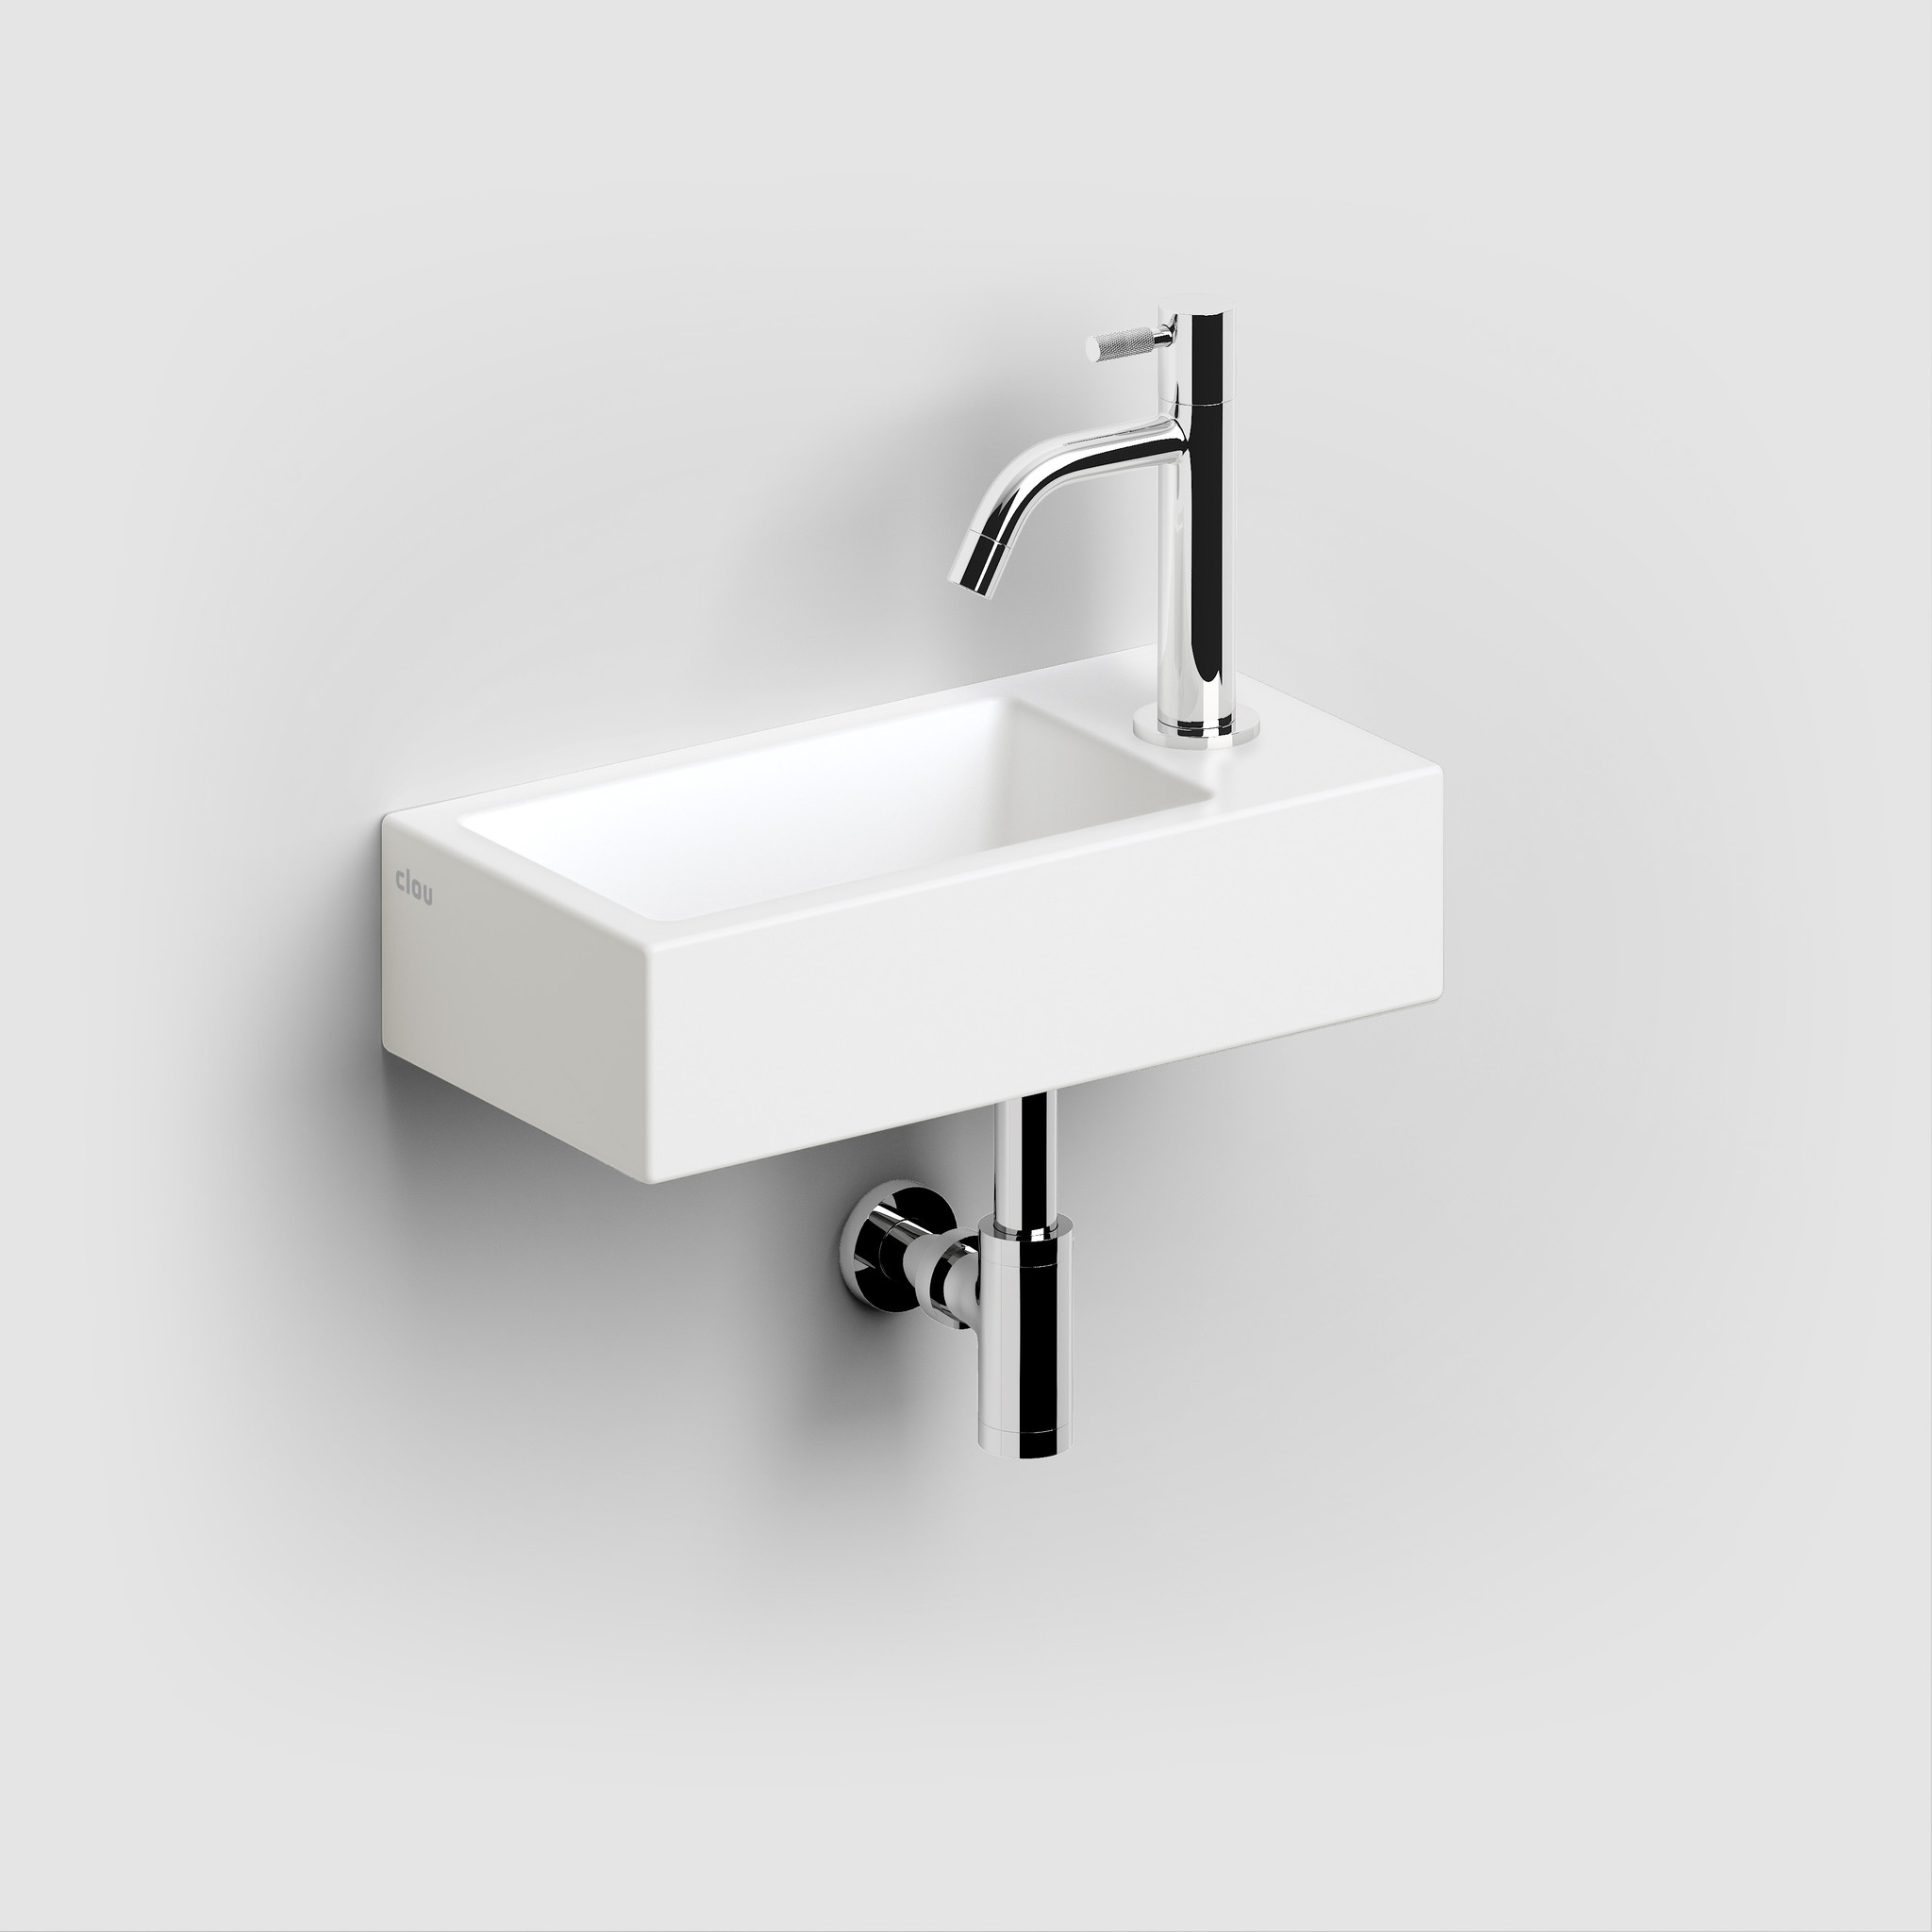 Flush 3 handbasin 36cm, with or without tap hole, with drain, matt white ceramics